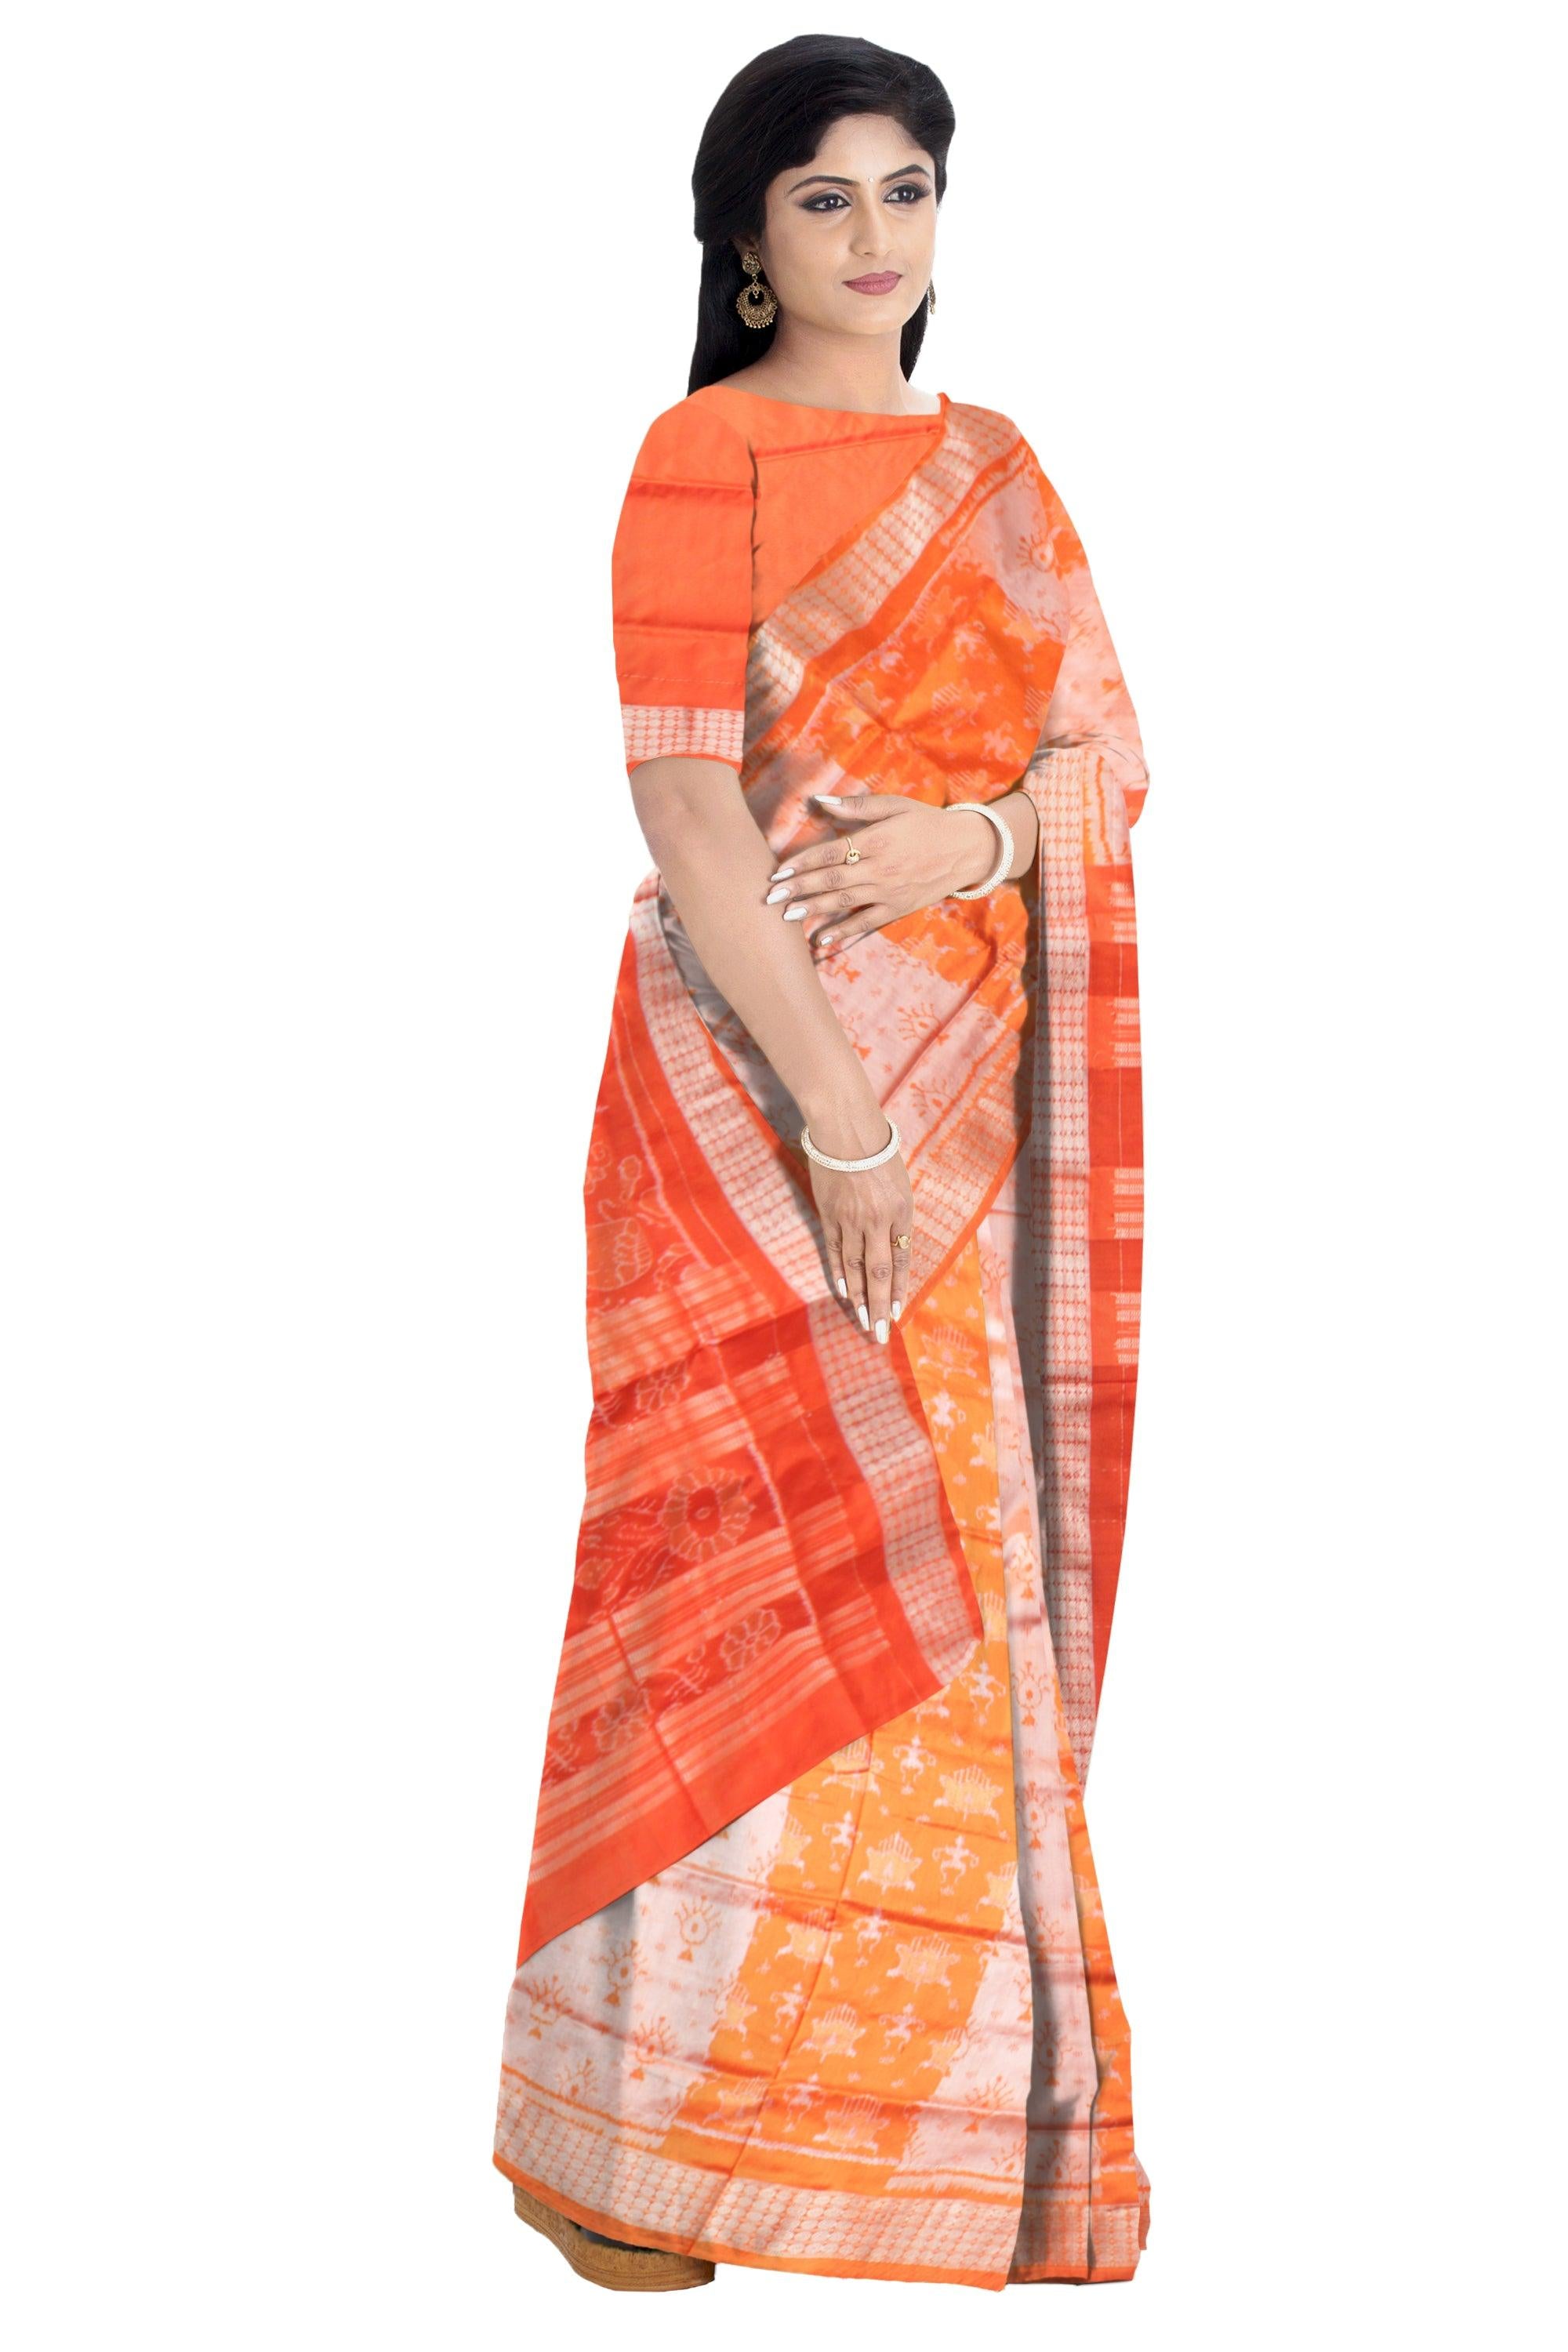 LATEST MARRAIGE COLLECTION TERRACOTTA PATTERN SILK SAREE IS ORANGE AND SILVER COLOR, WITH MATCHING BLOUSE PIECE. - Koshali Arts & Crafts Enterprise